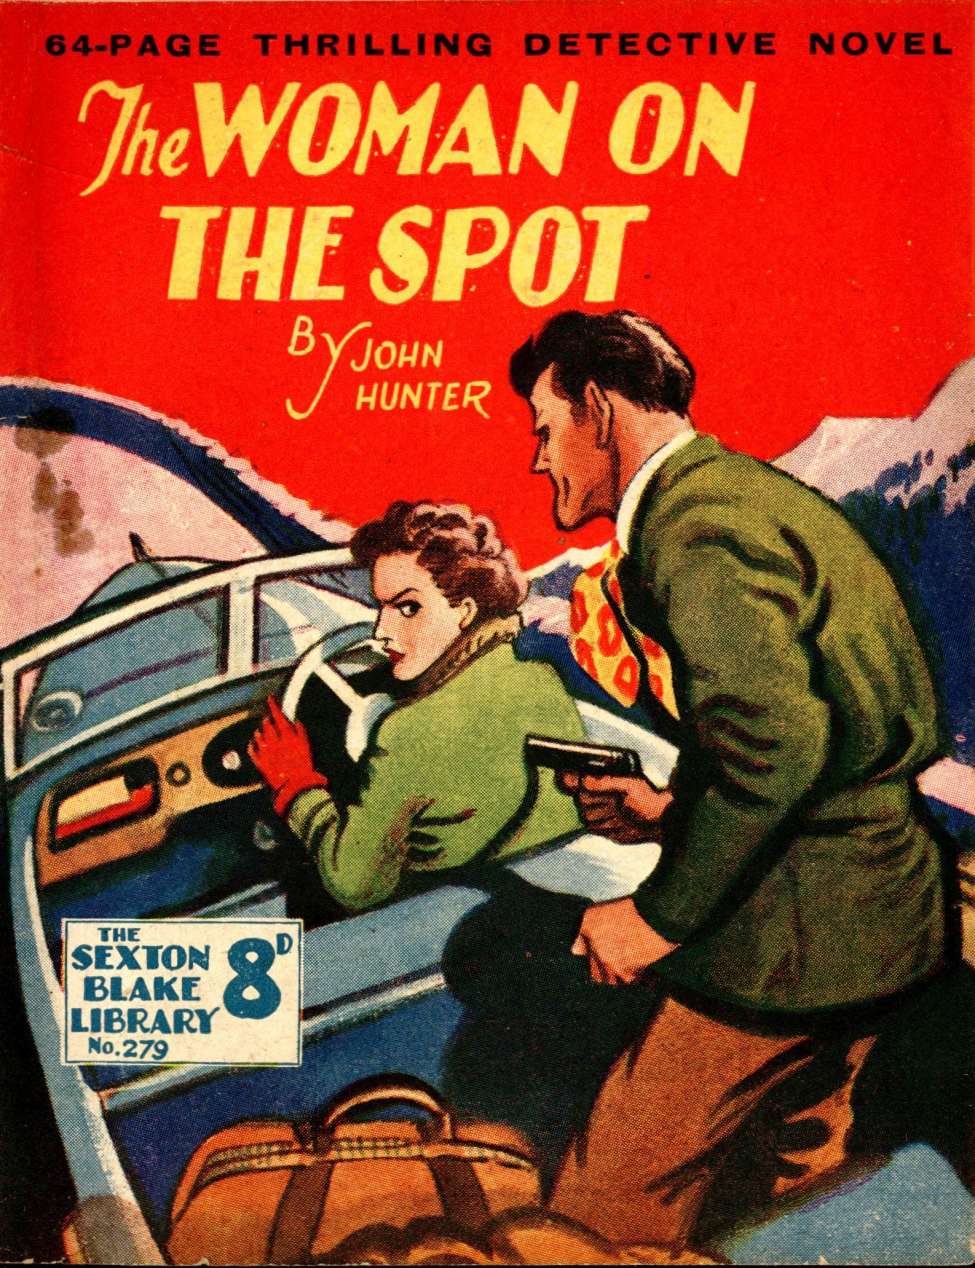 Book Cover For Sexton Blake Library S3 279 - The Woman on the Spot